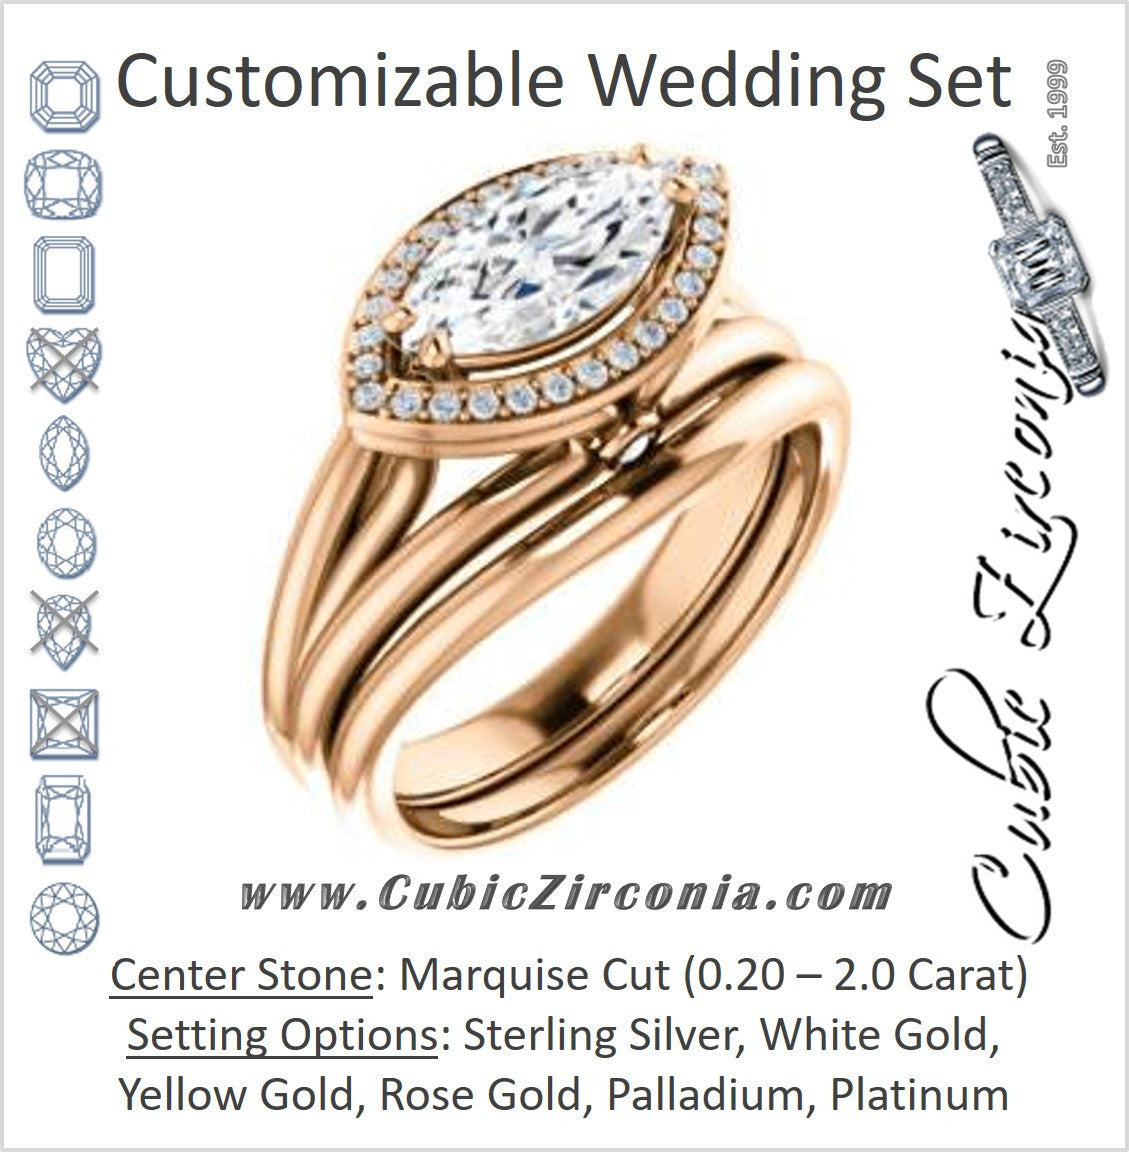 CZ Wedding Set, featuring The Wanda Lea engagement ring (Customizable Marquise Cut Halo-style with Ultrawide Tri-split Band & Peekaboo Accents)